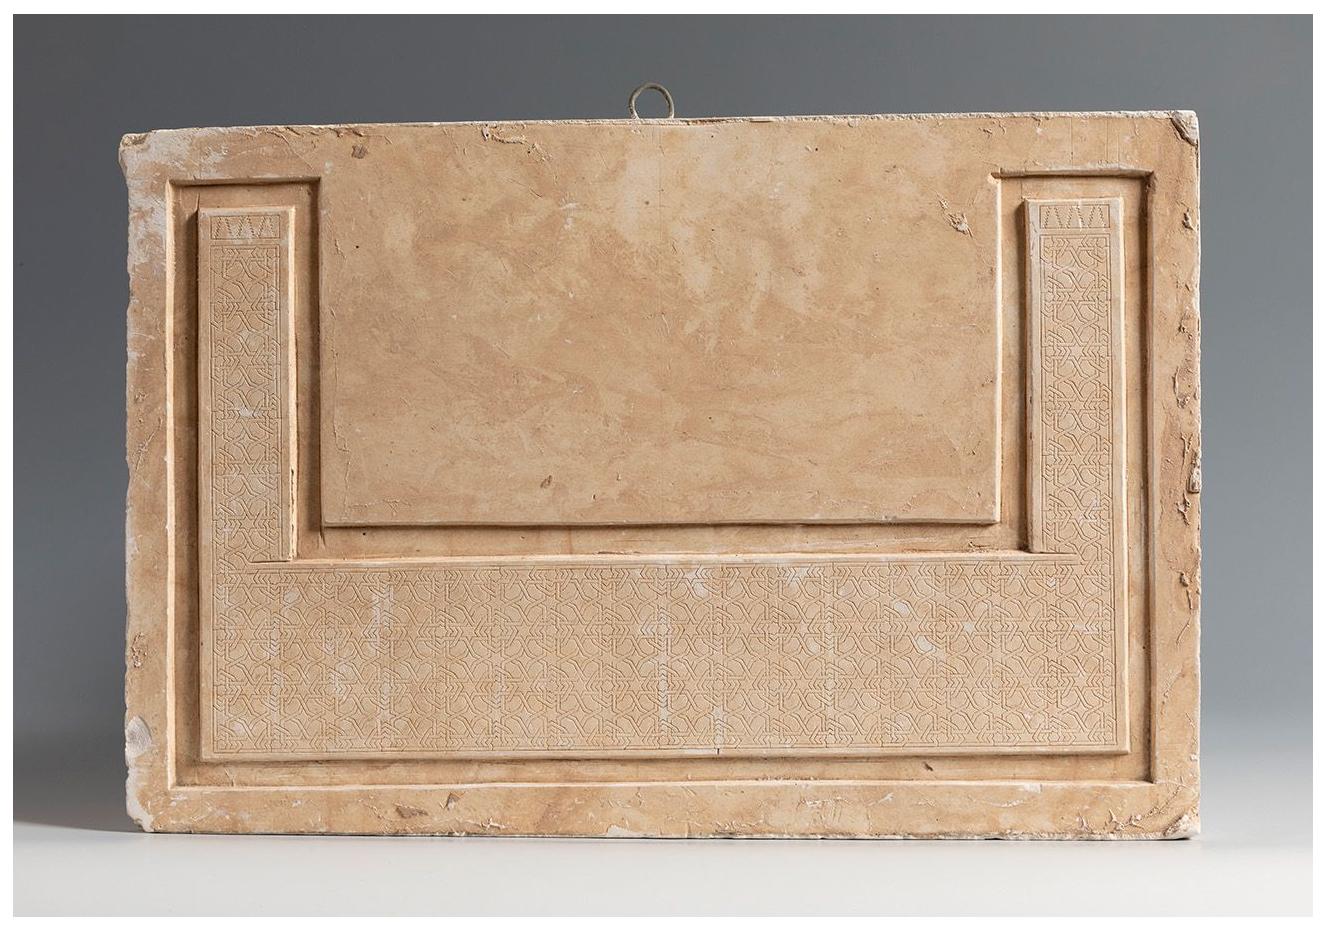 Mould with Nasrid plasterwork motif. Granada, second half of the 19th century.
Plaster.
It has slight flaws on the edges.
Measurements: 28 x 41 x 2 m.
Following the Mudéjar tradition of working plaster as a decorative material, this plaster